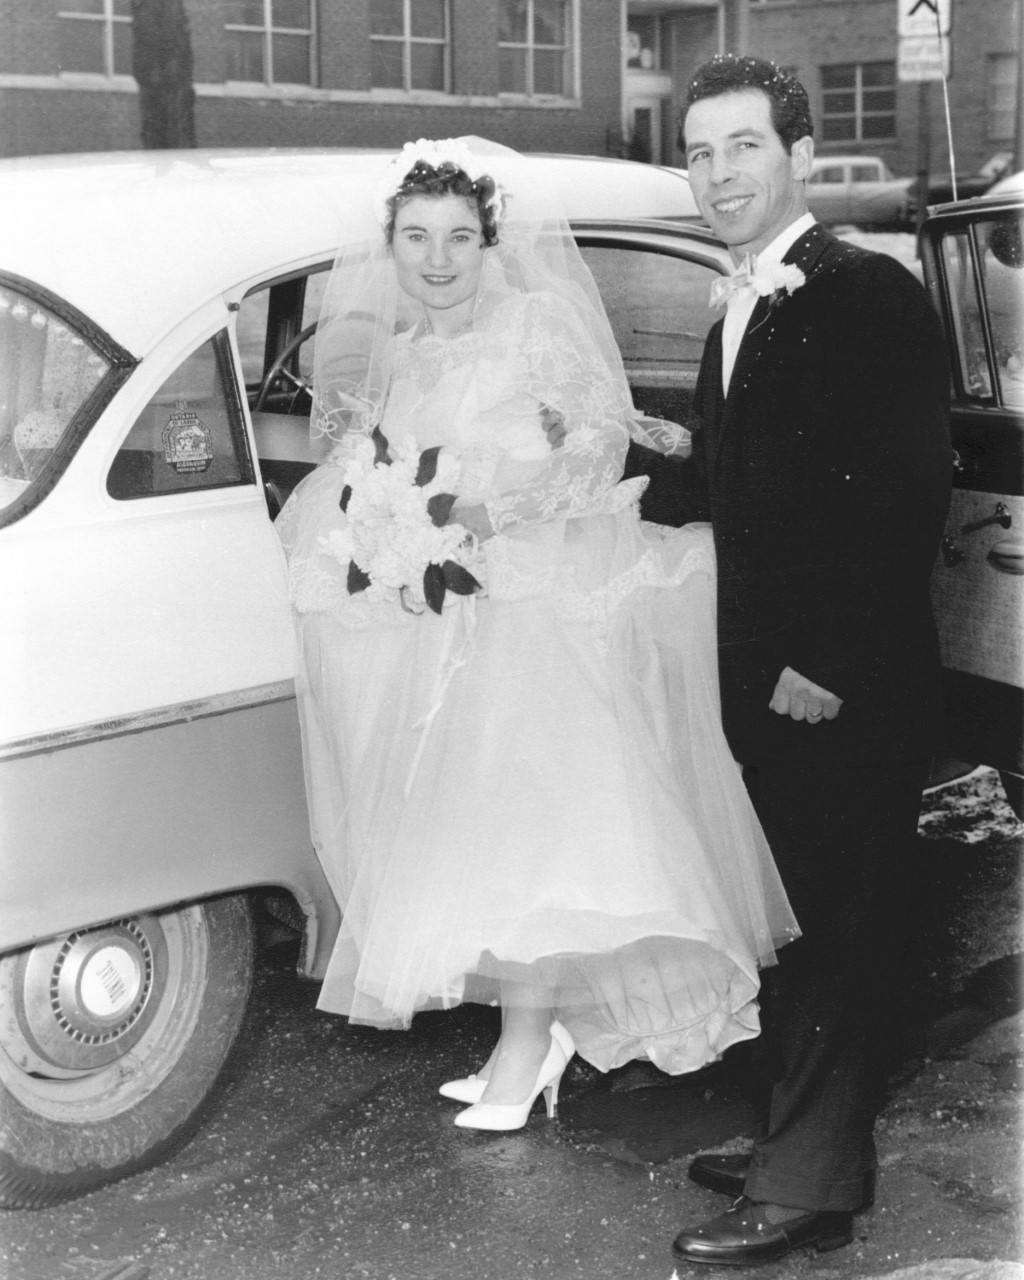 A black and white photo of an Italian man and woman on their wedding day getting into a car.